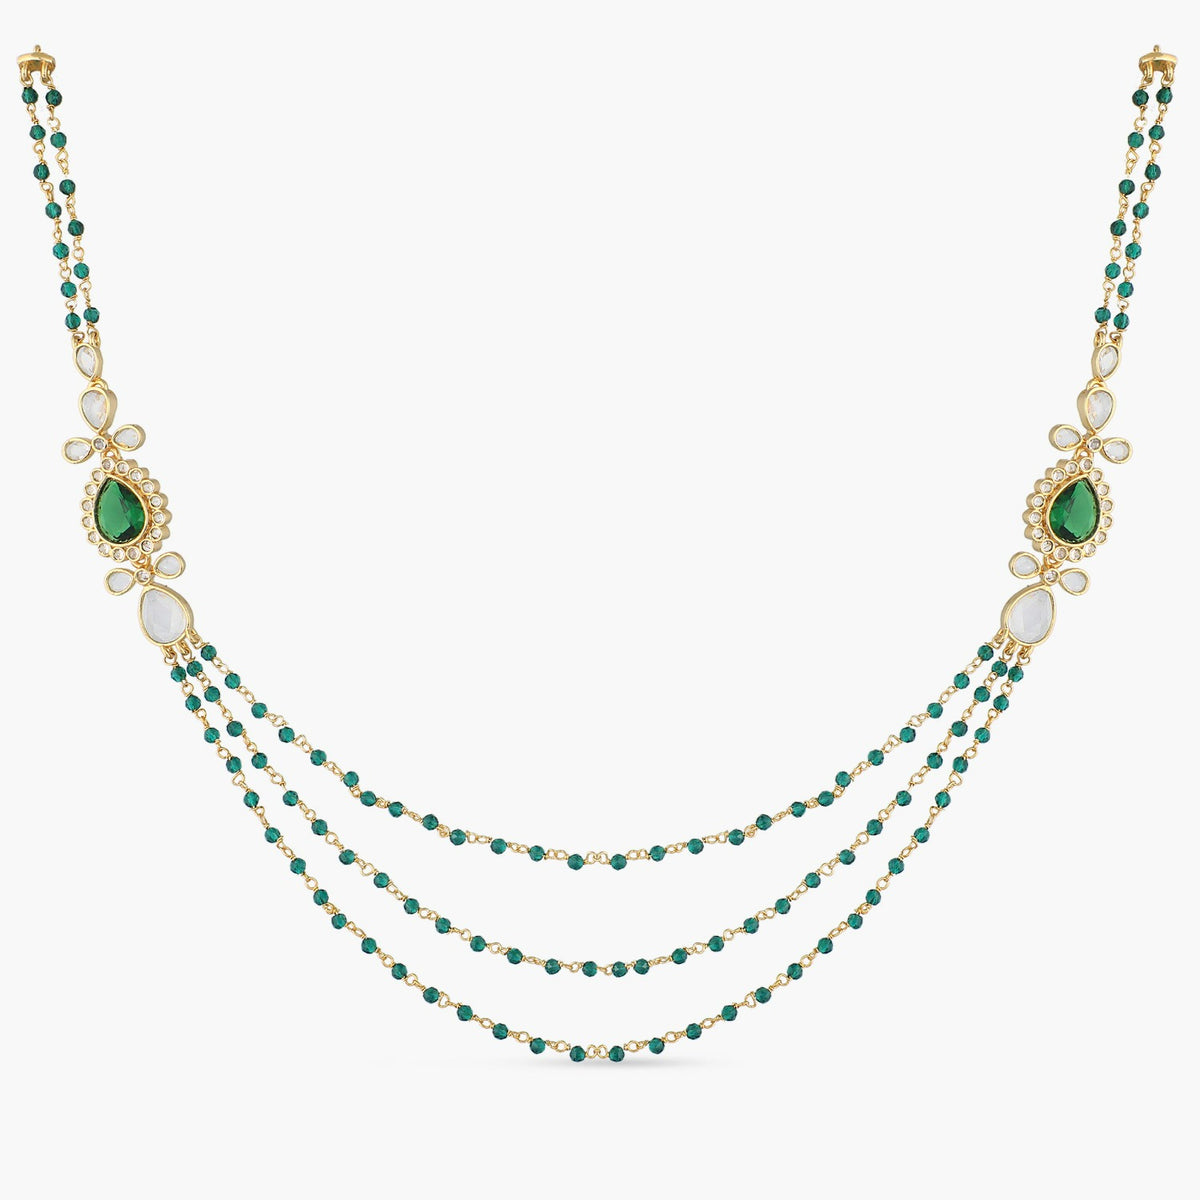 Classic Beads Layered Necklace